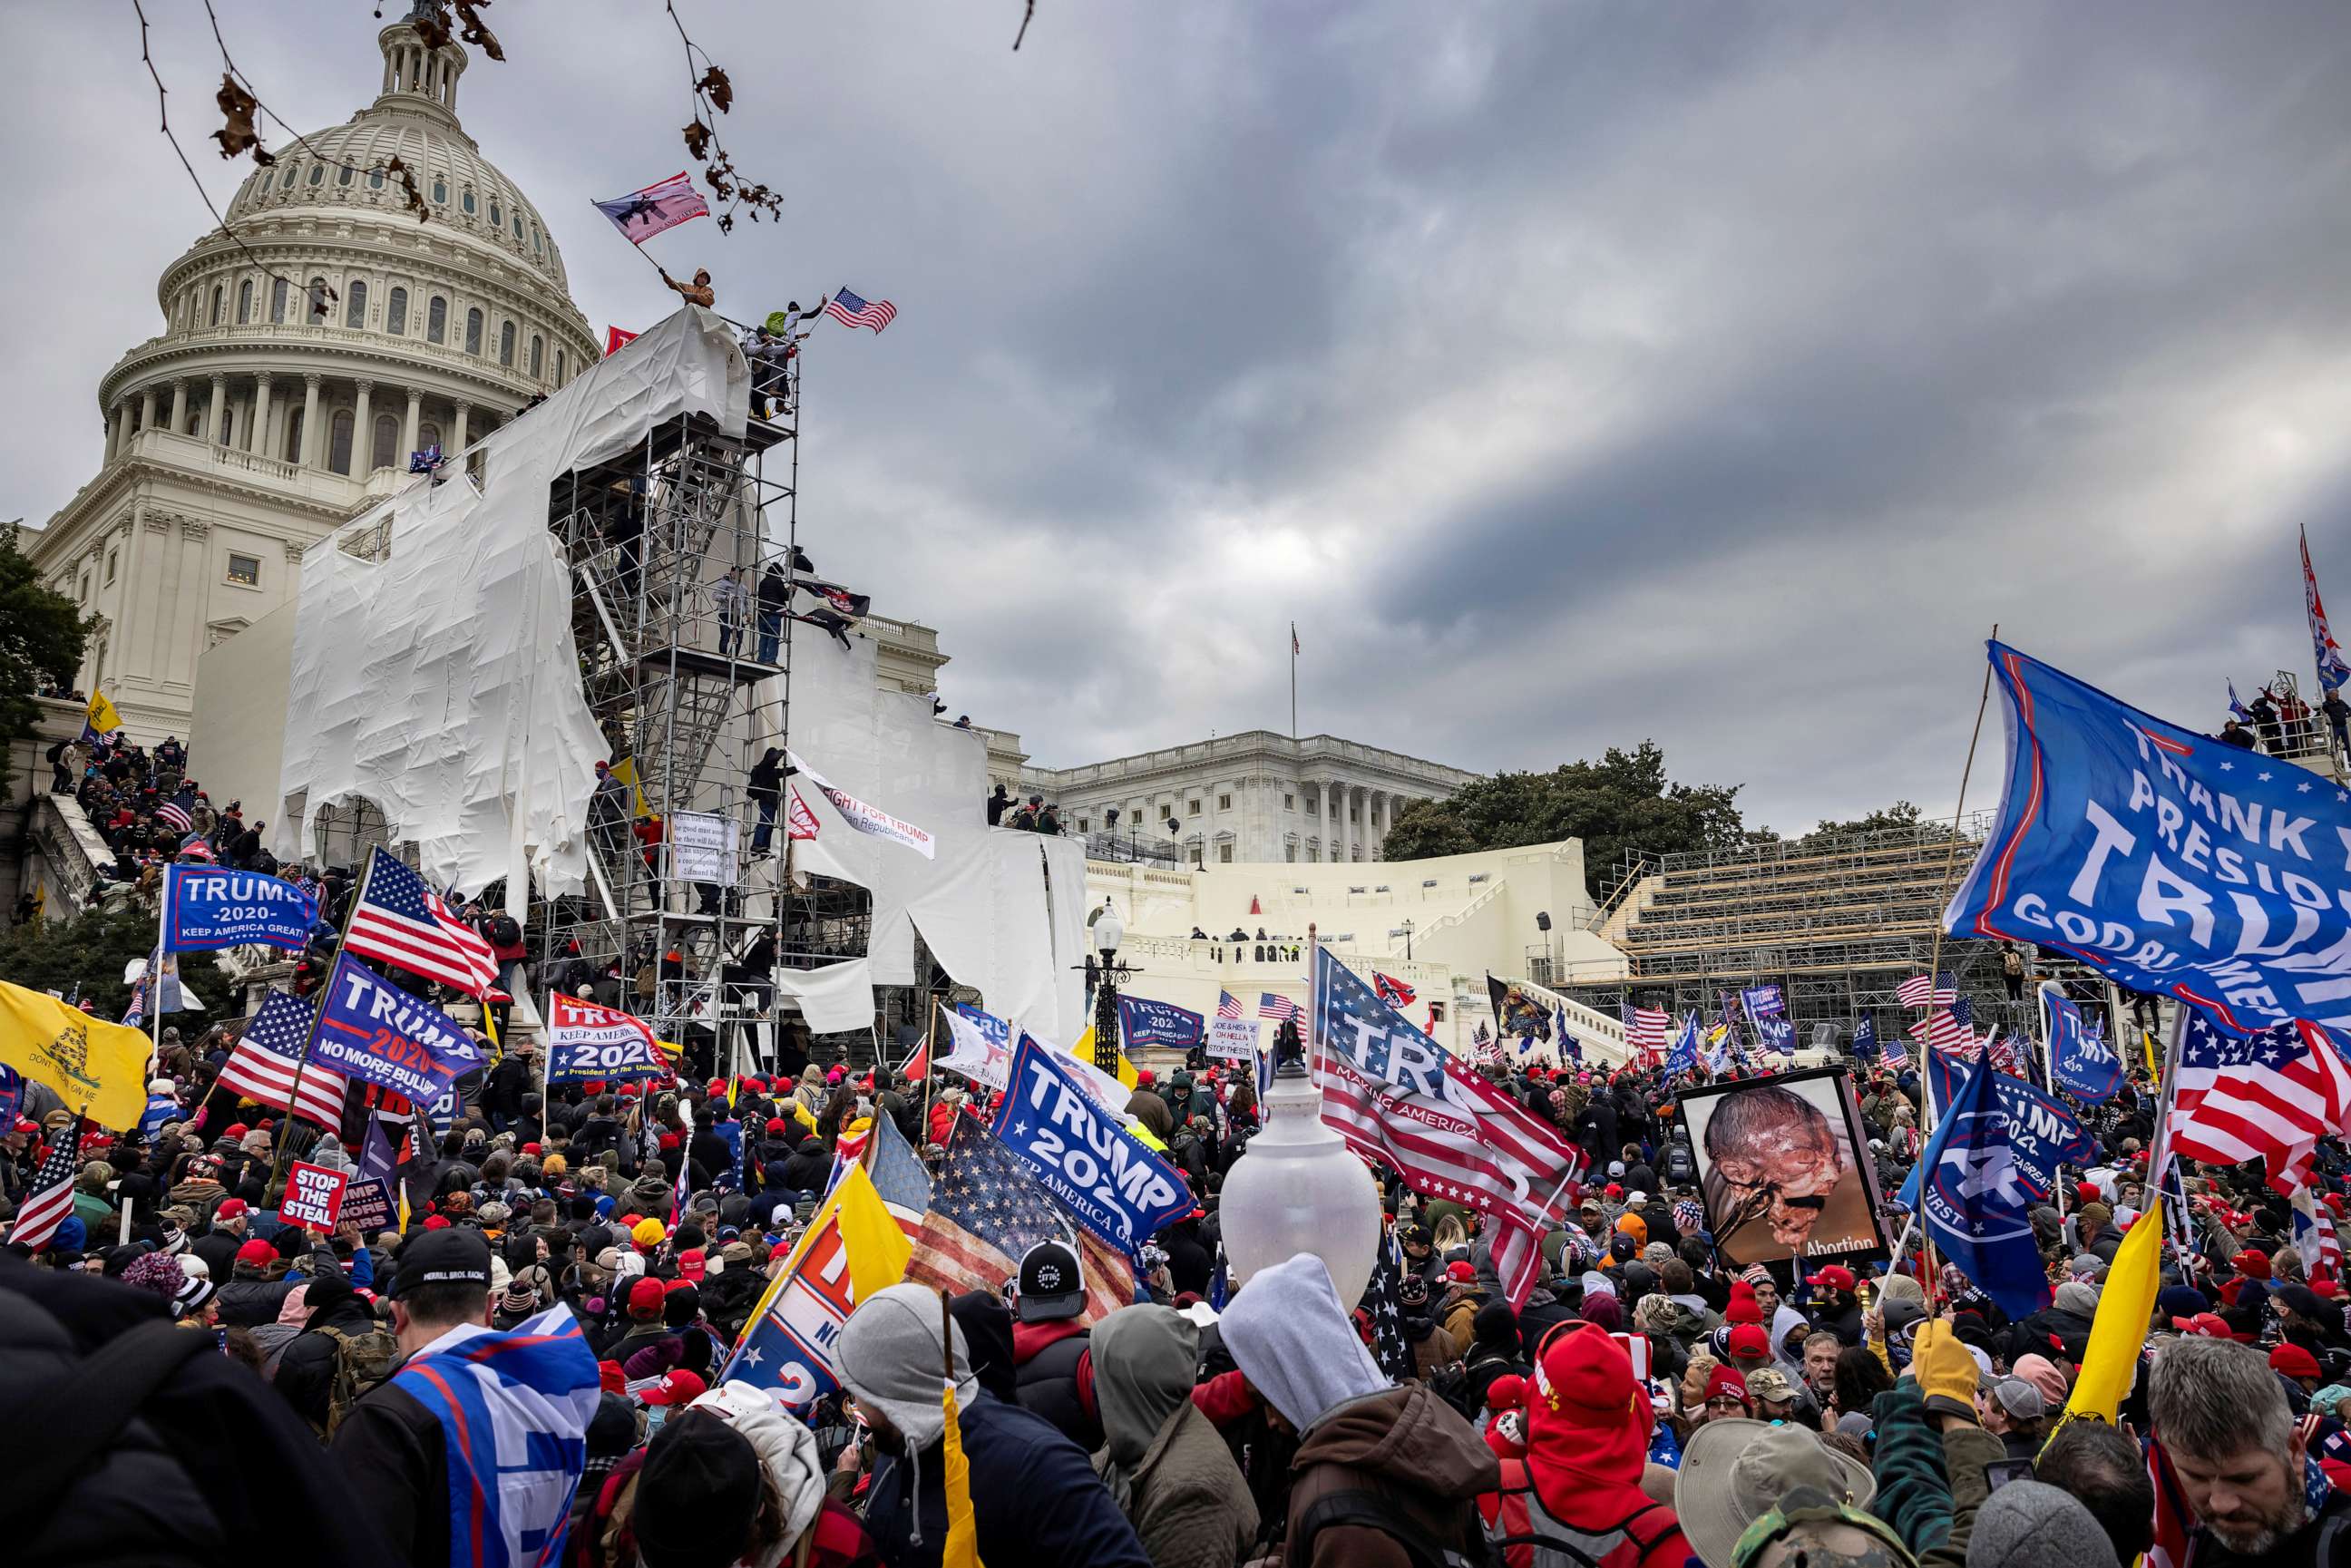 PHOTO: Trump supporters clash with police and security forces as people try to storm the US Capitol on January 6, 2021 in Washington, DC.